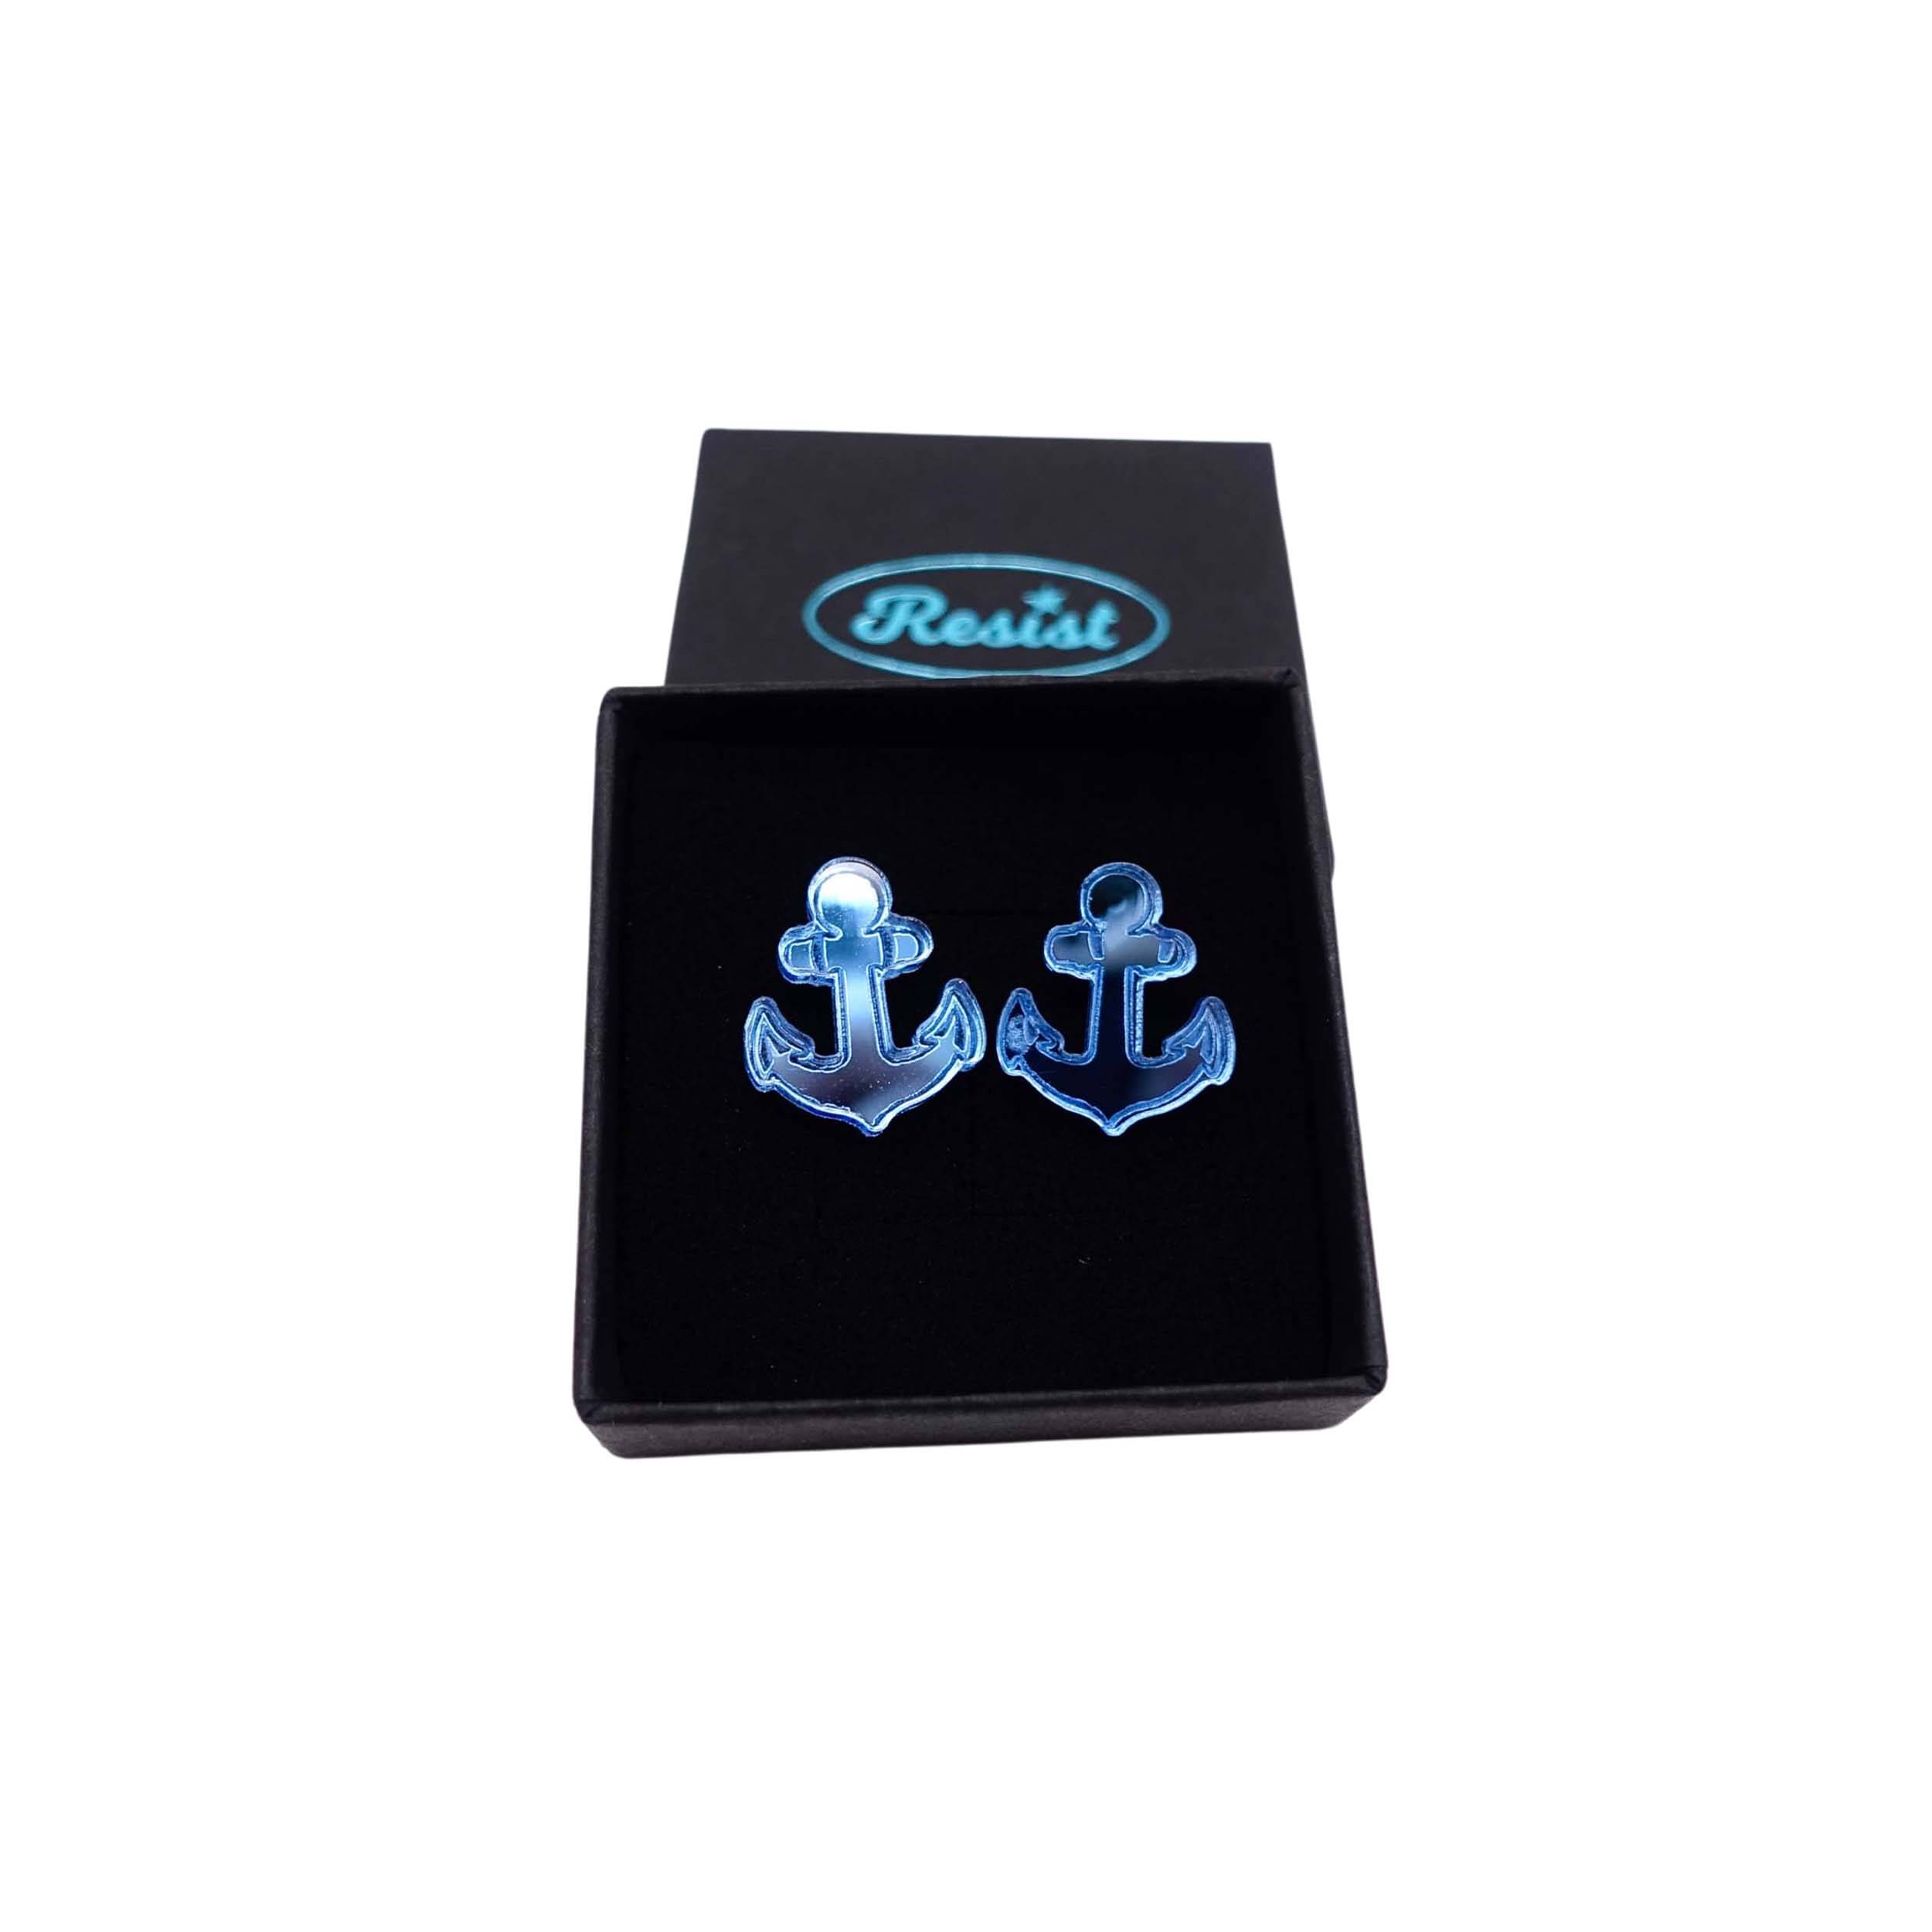 Sky mirror little anchor earrings shown in a Wear and Resist gift box. 